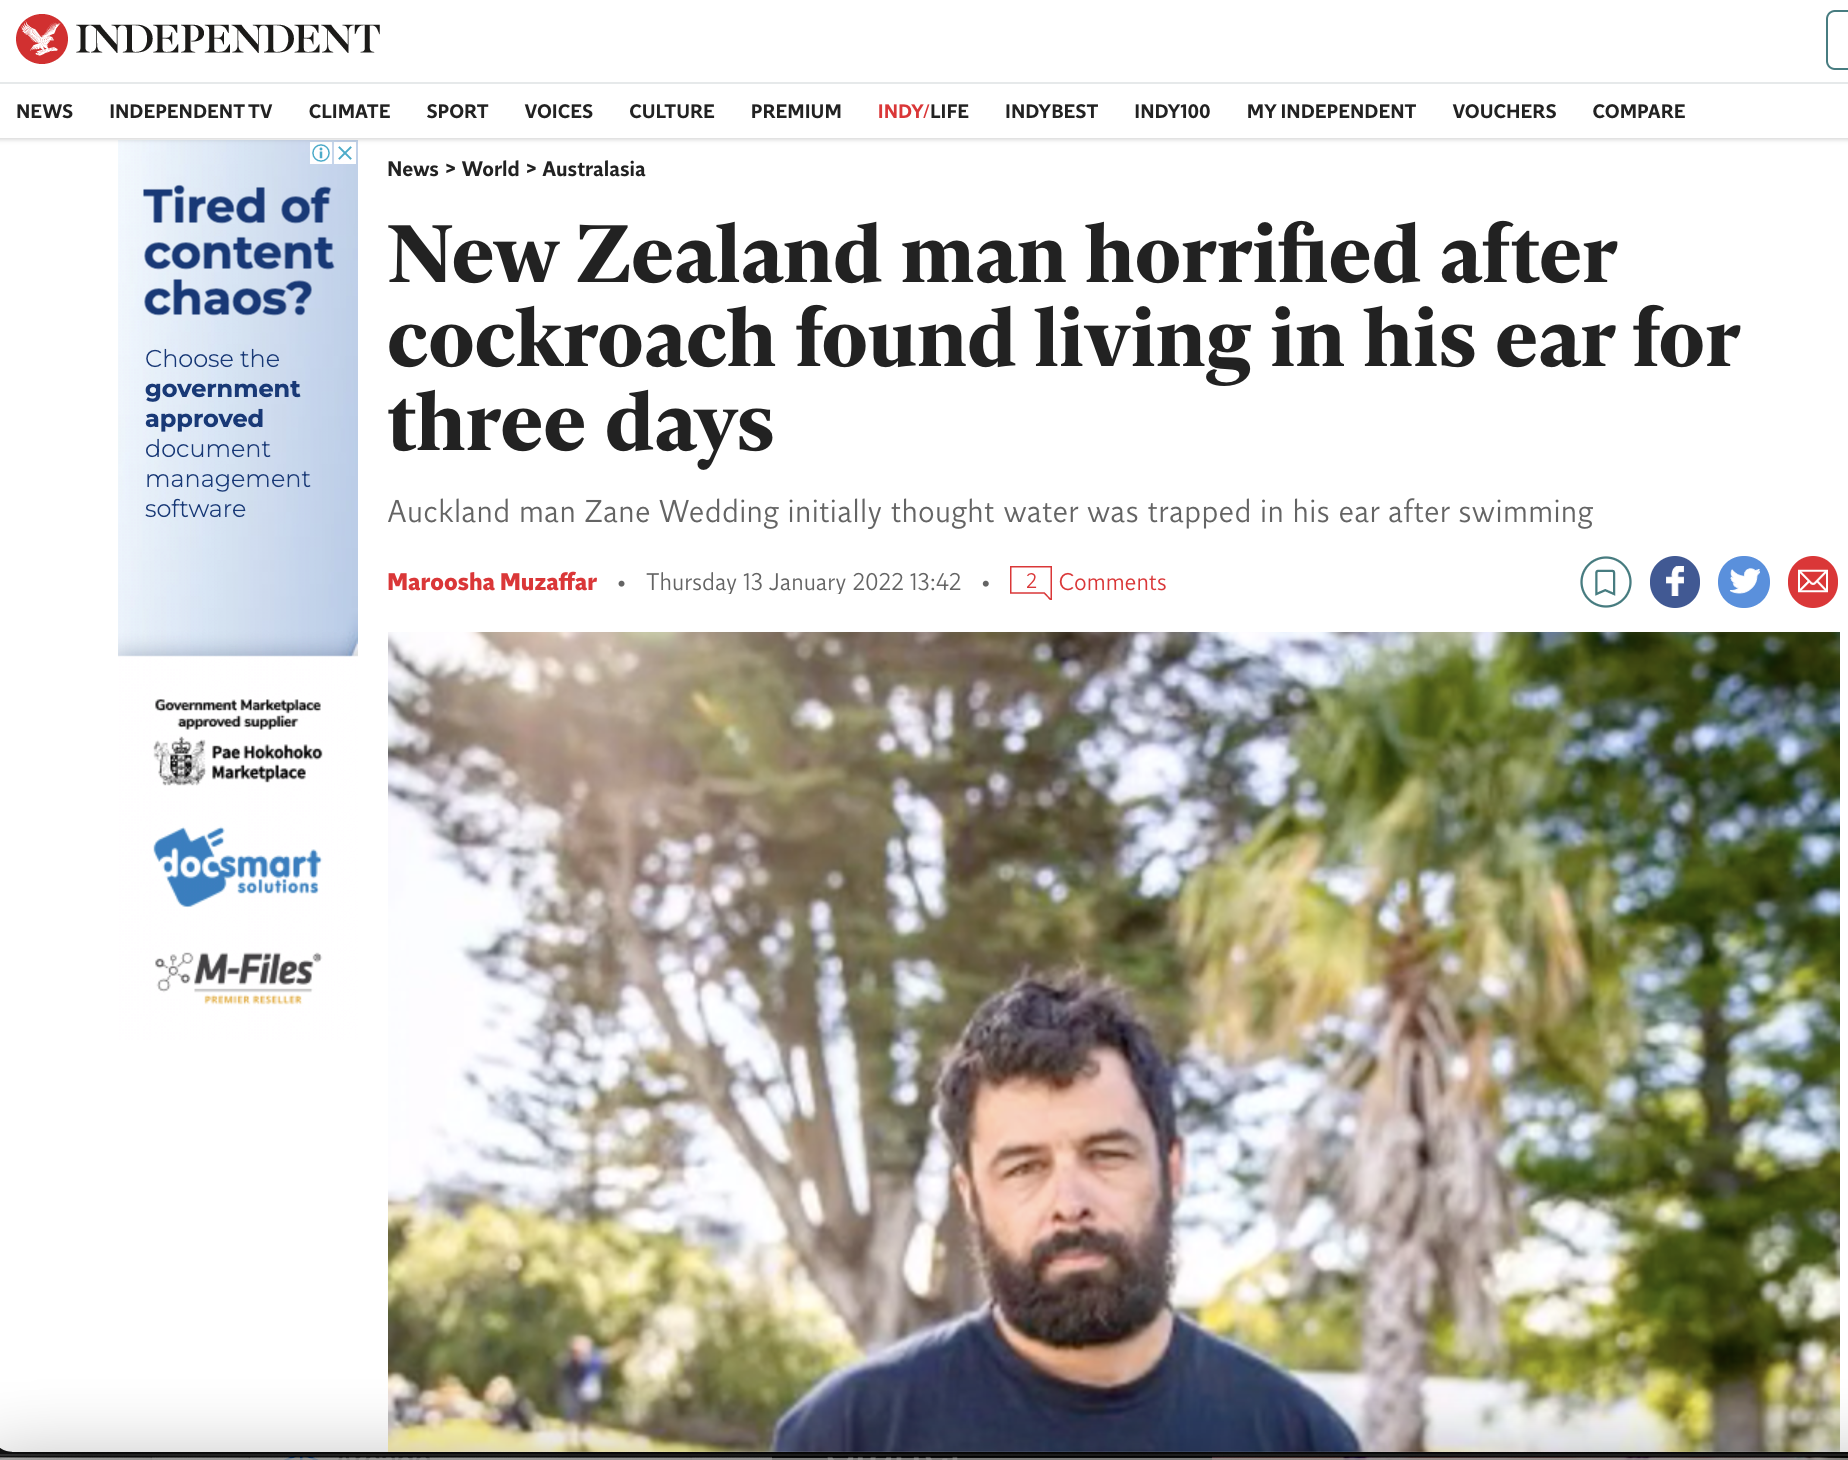 Picture is of a article in the Independent titled: "New Zealand man horrified after cockroach found living in his ear for three days